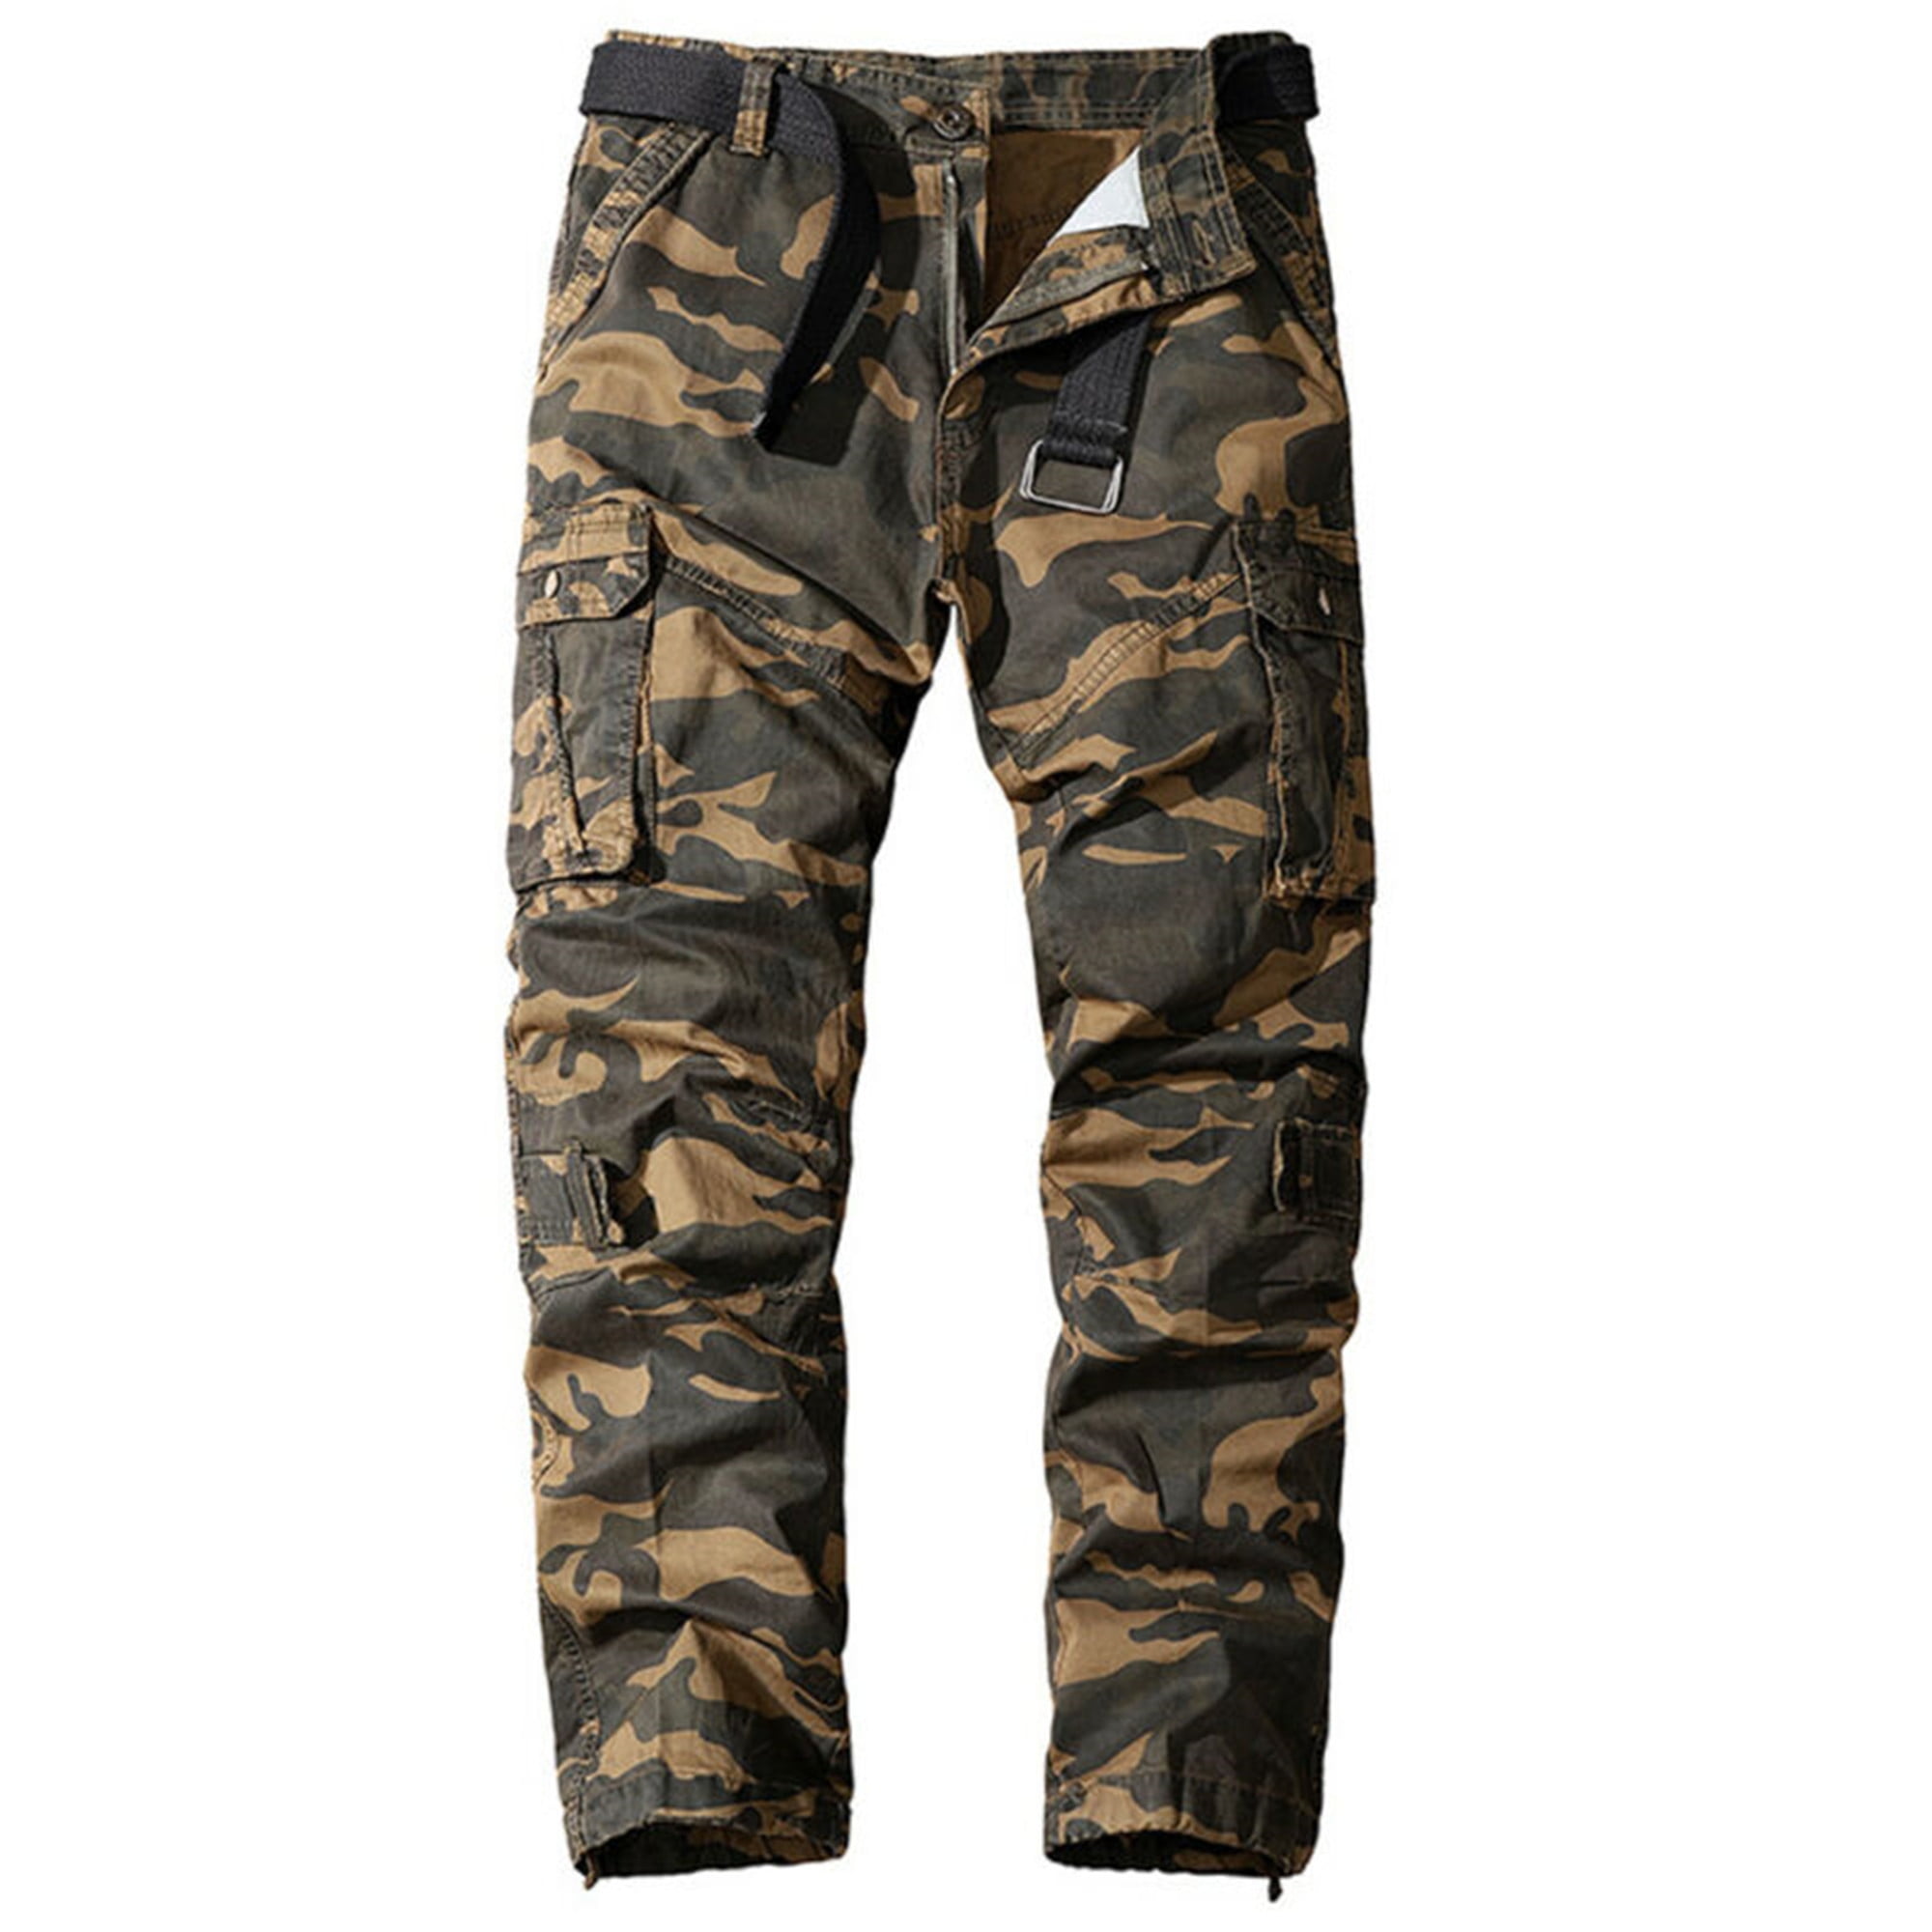 Mens Fishing Camo Casual Army Cargo Combat Work Pants Straight Leg Long Trousers 